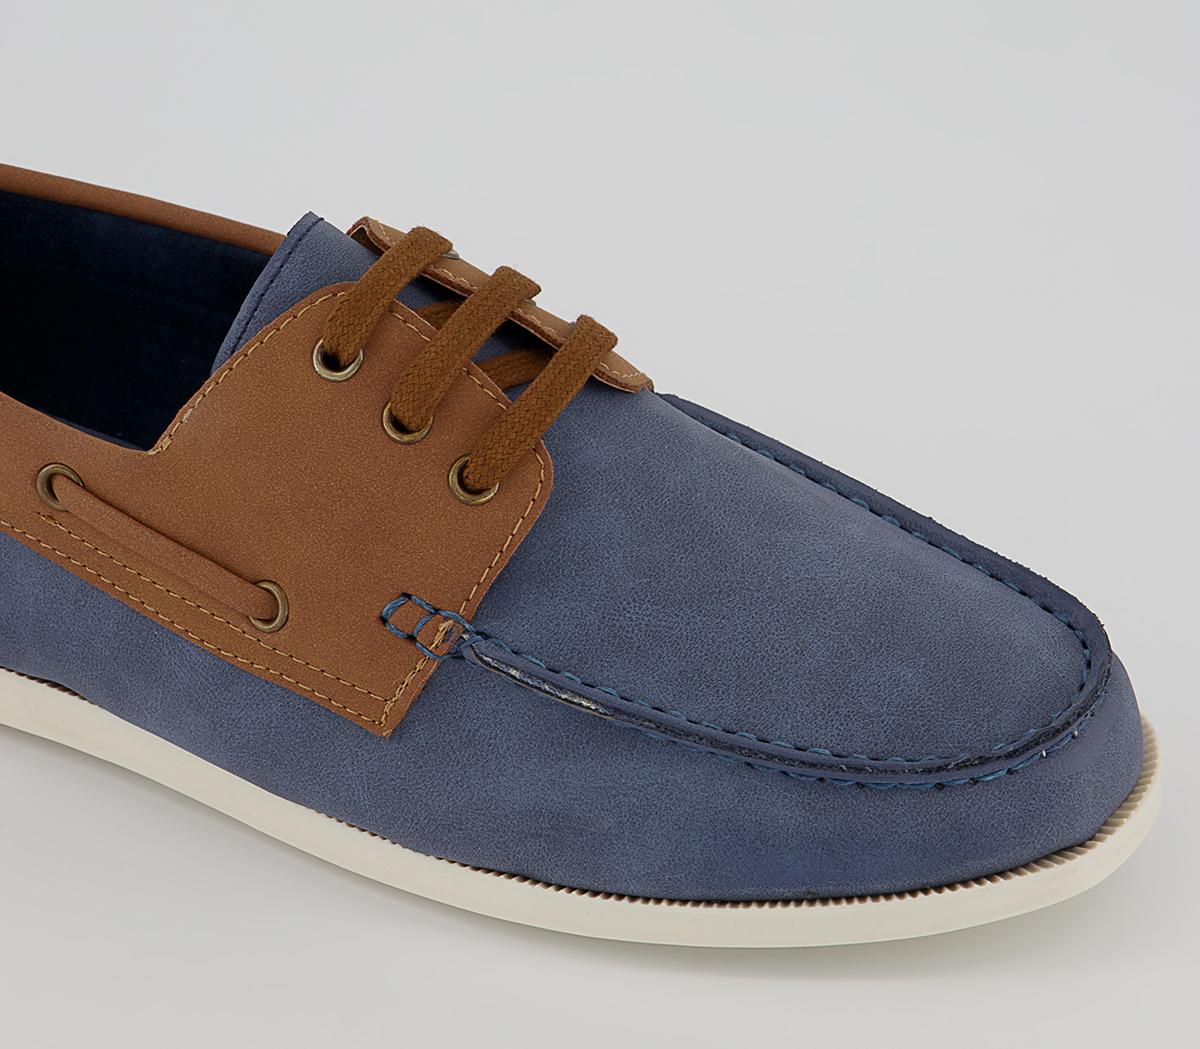 OFFICE Cree Boat Shoes Navy Brown - Boat Shoes